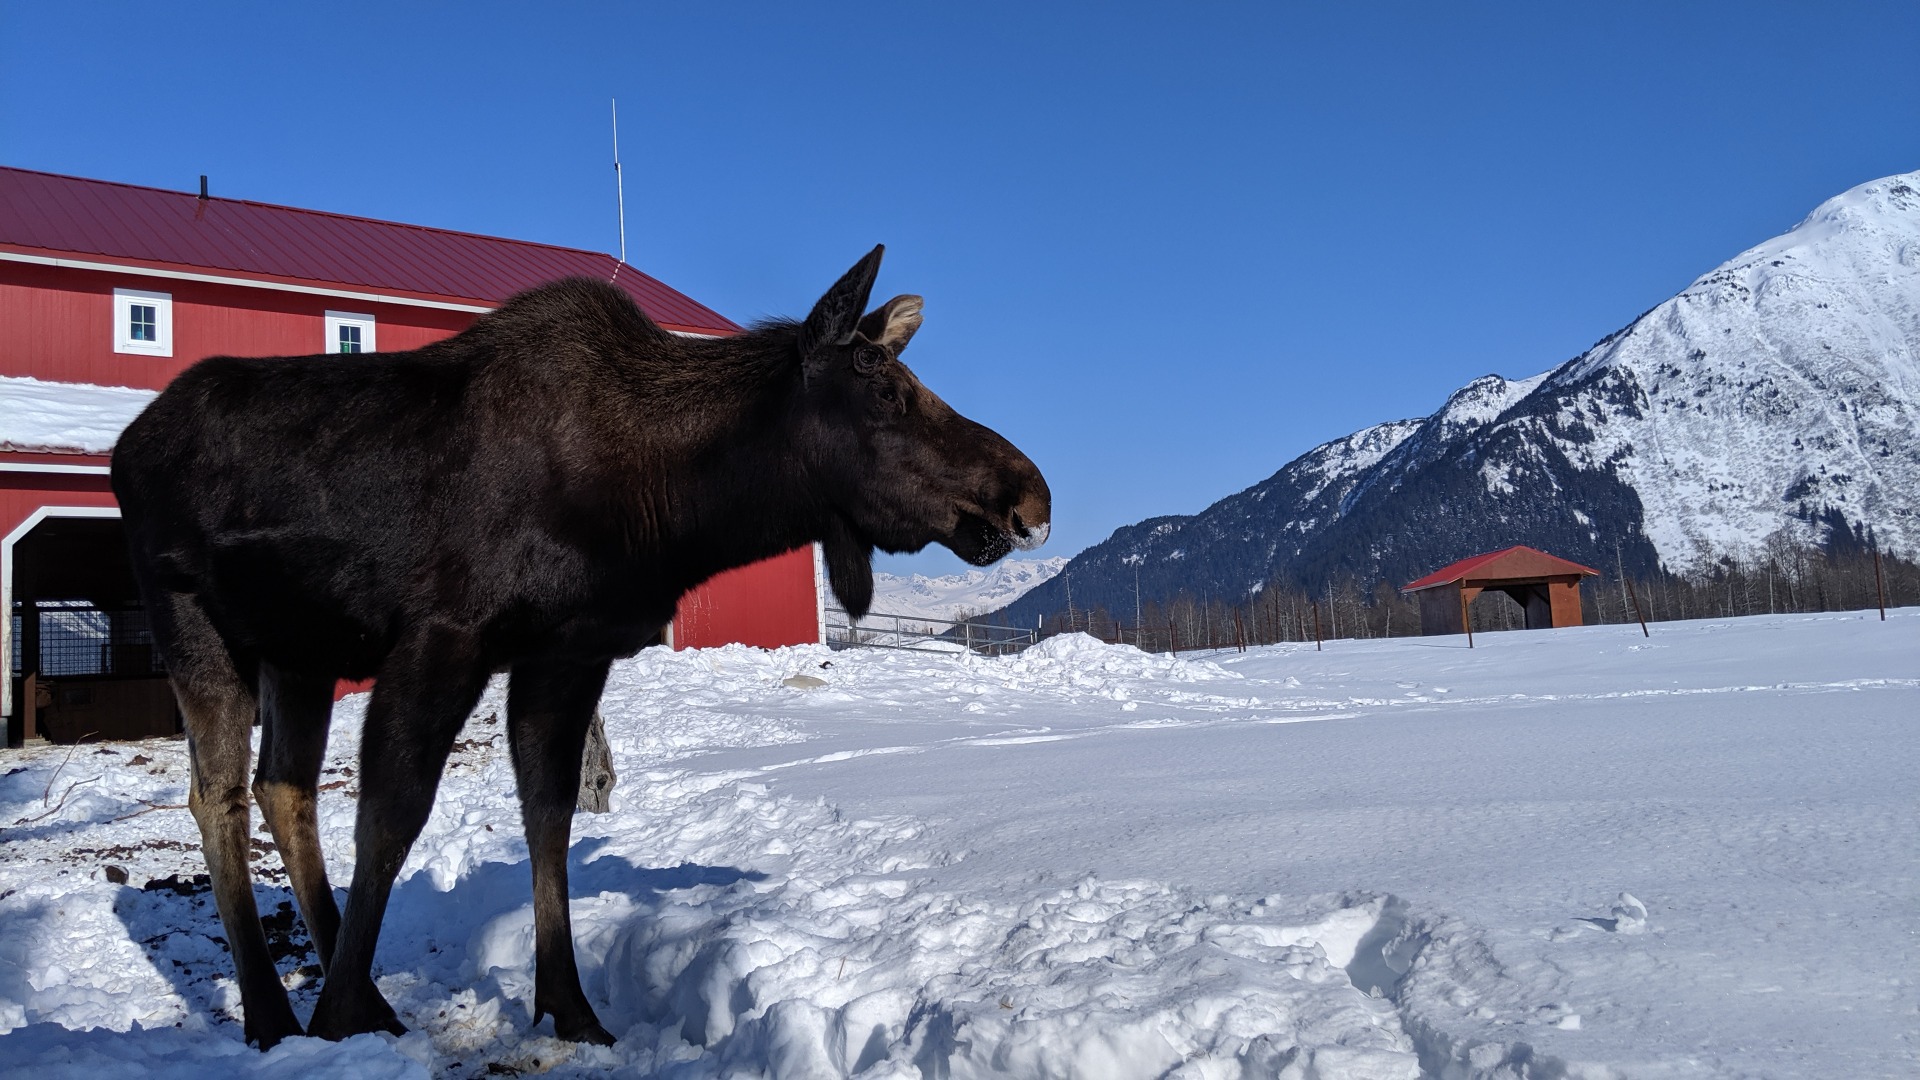 A Record-Breaking Moose Count!